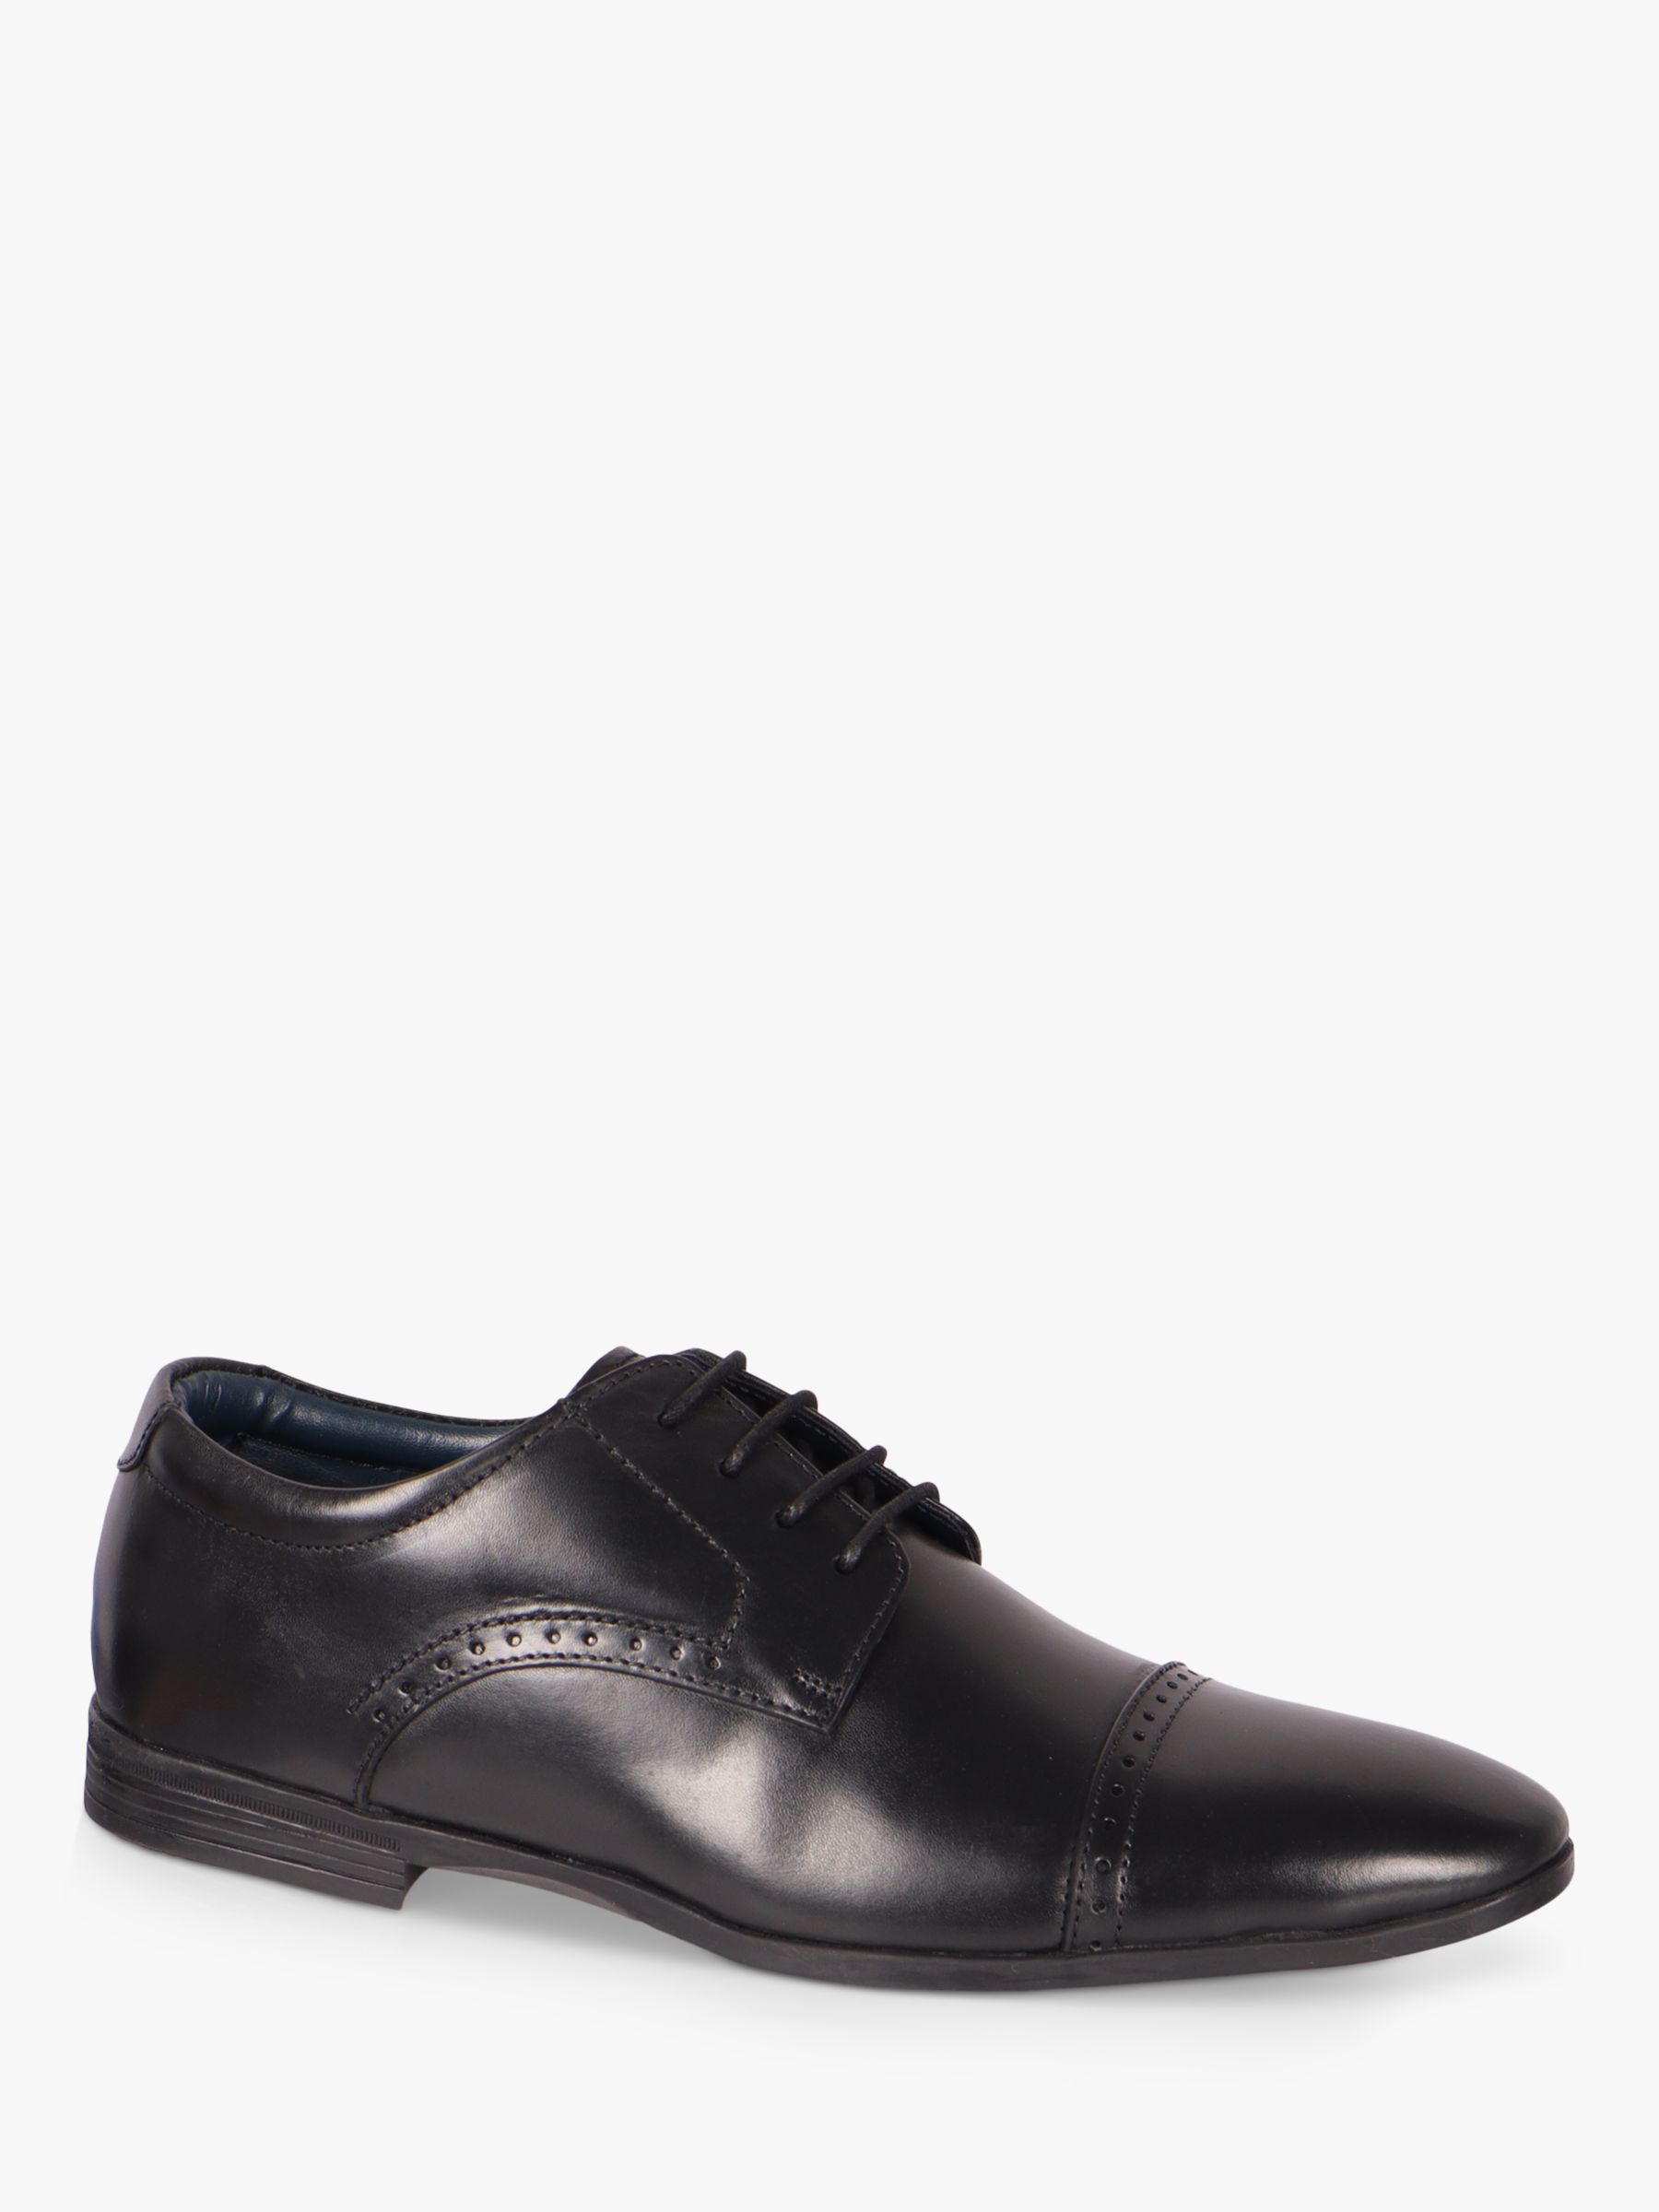 Silver Street London Lawrence Leather Brogues, Black at John Lewis ...